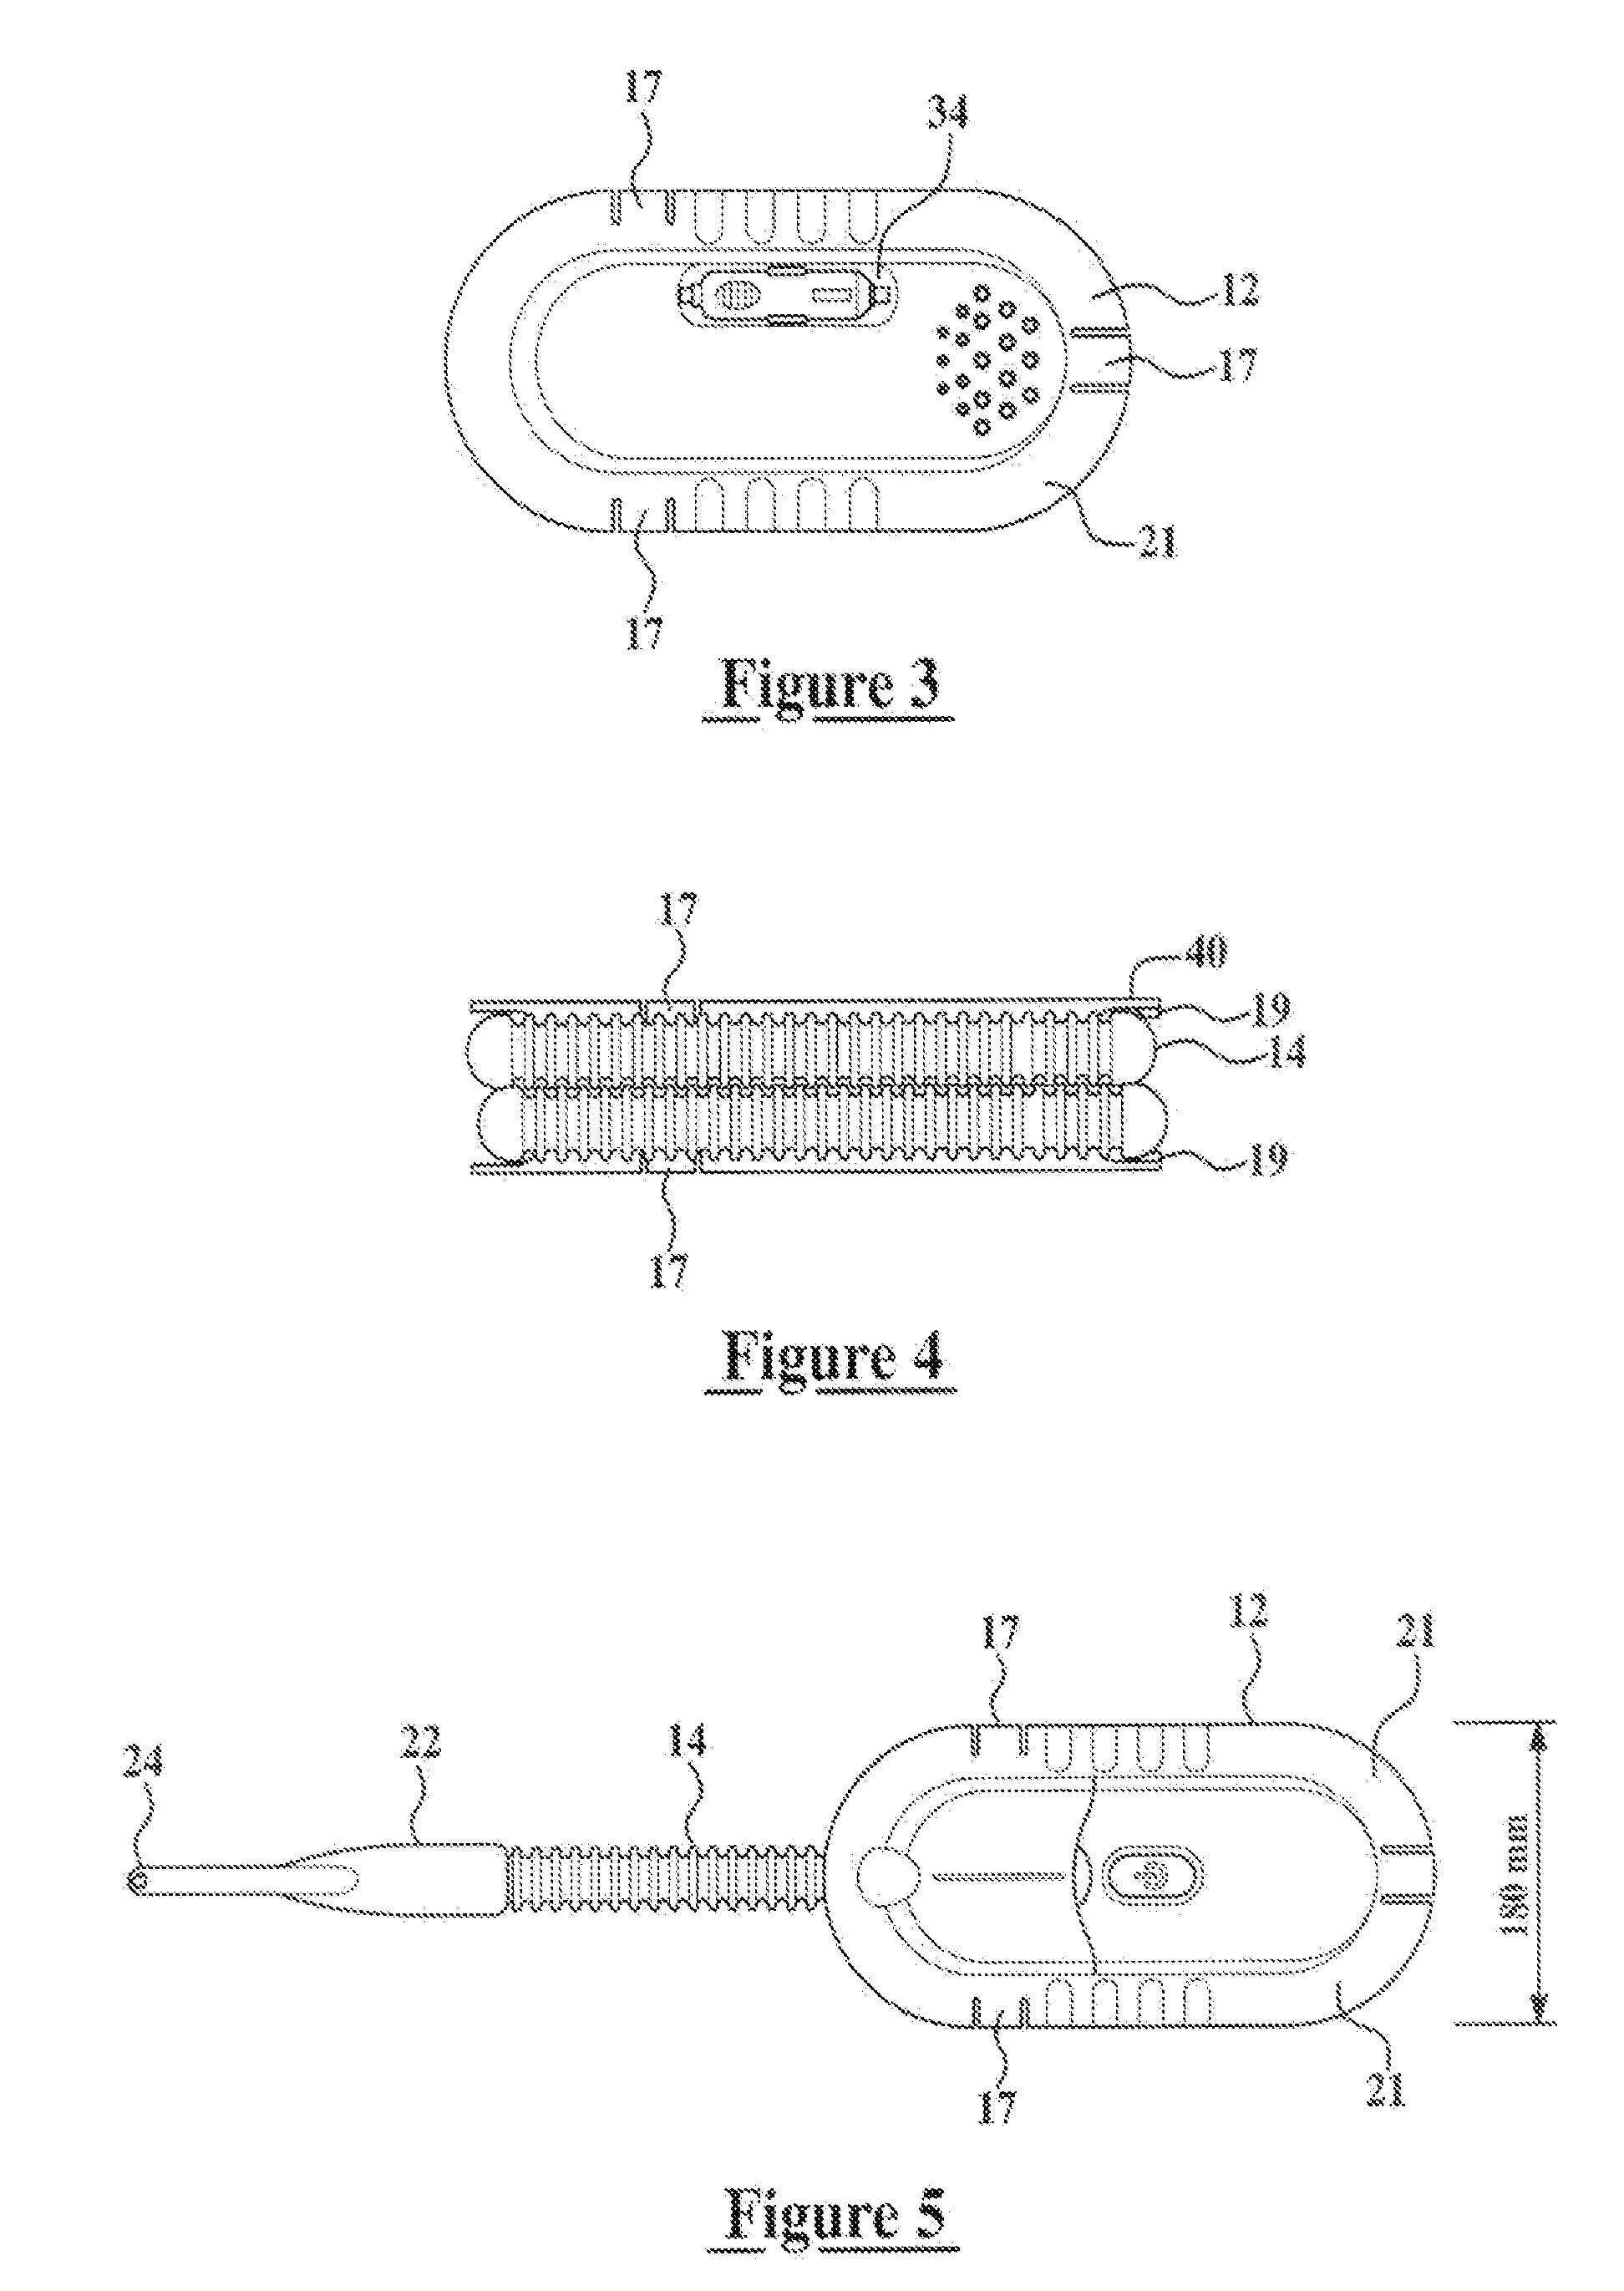 Portable vacuum cleaner and method for storing a vacuum hose